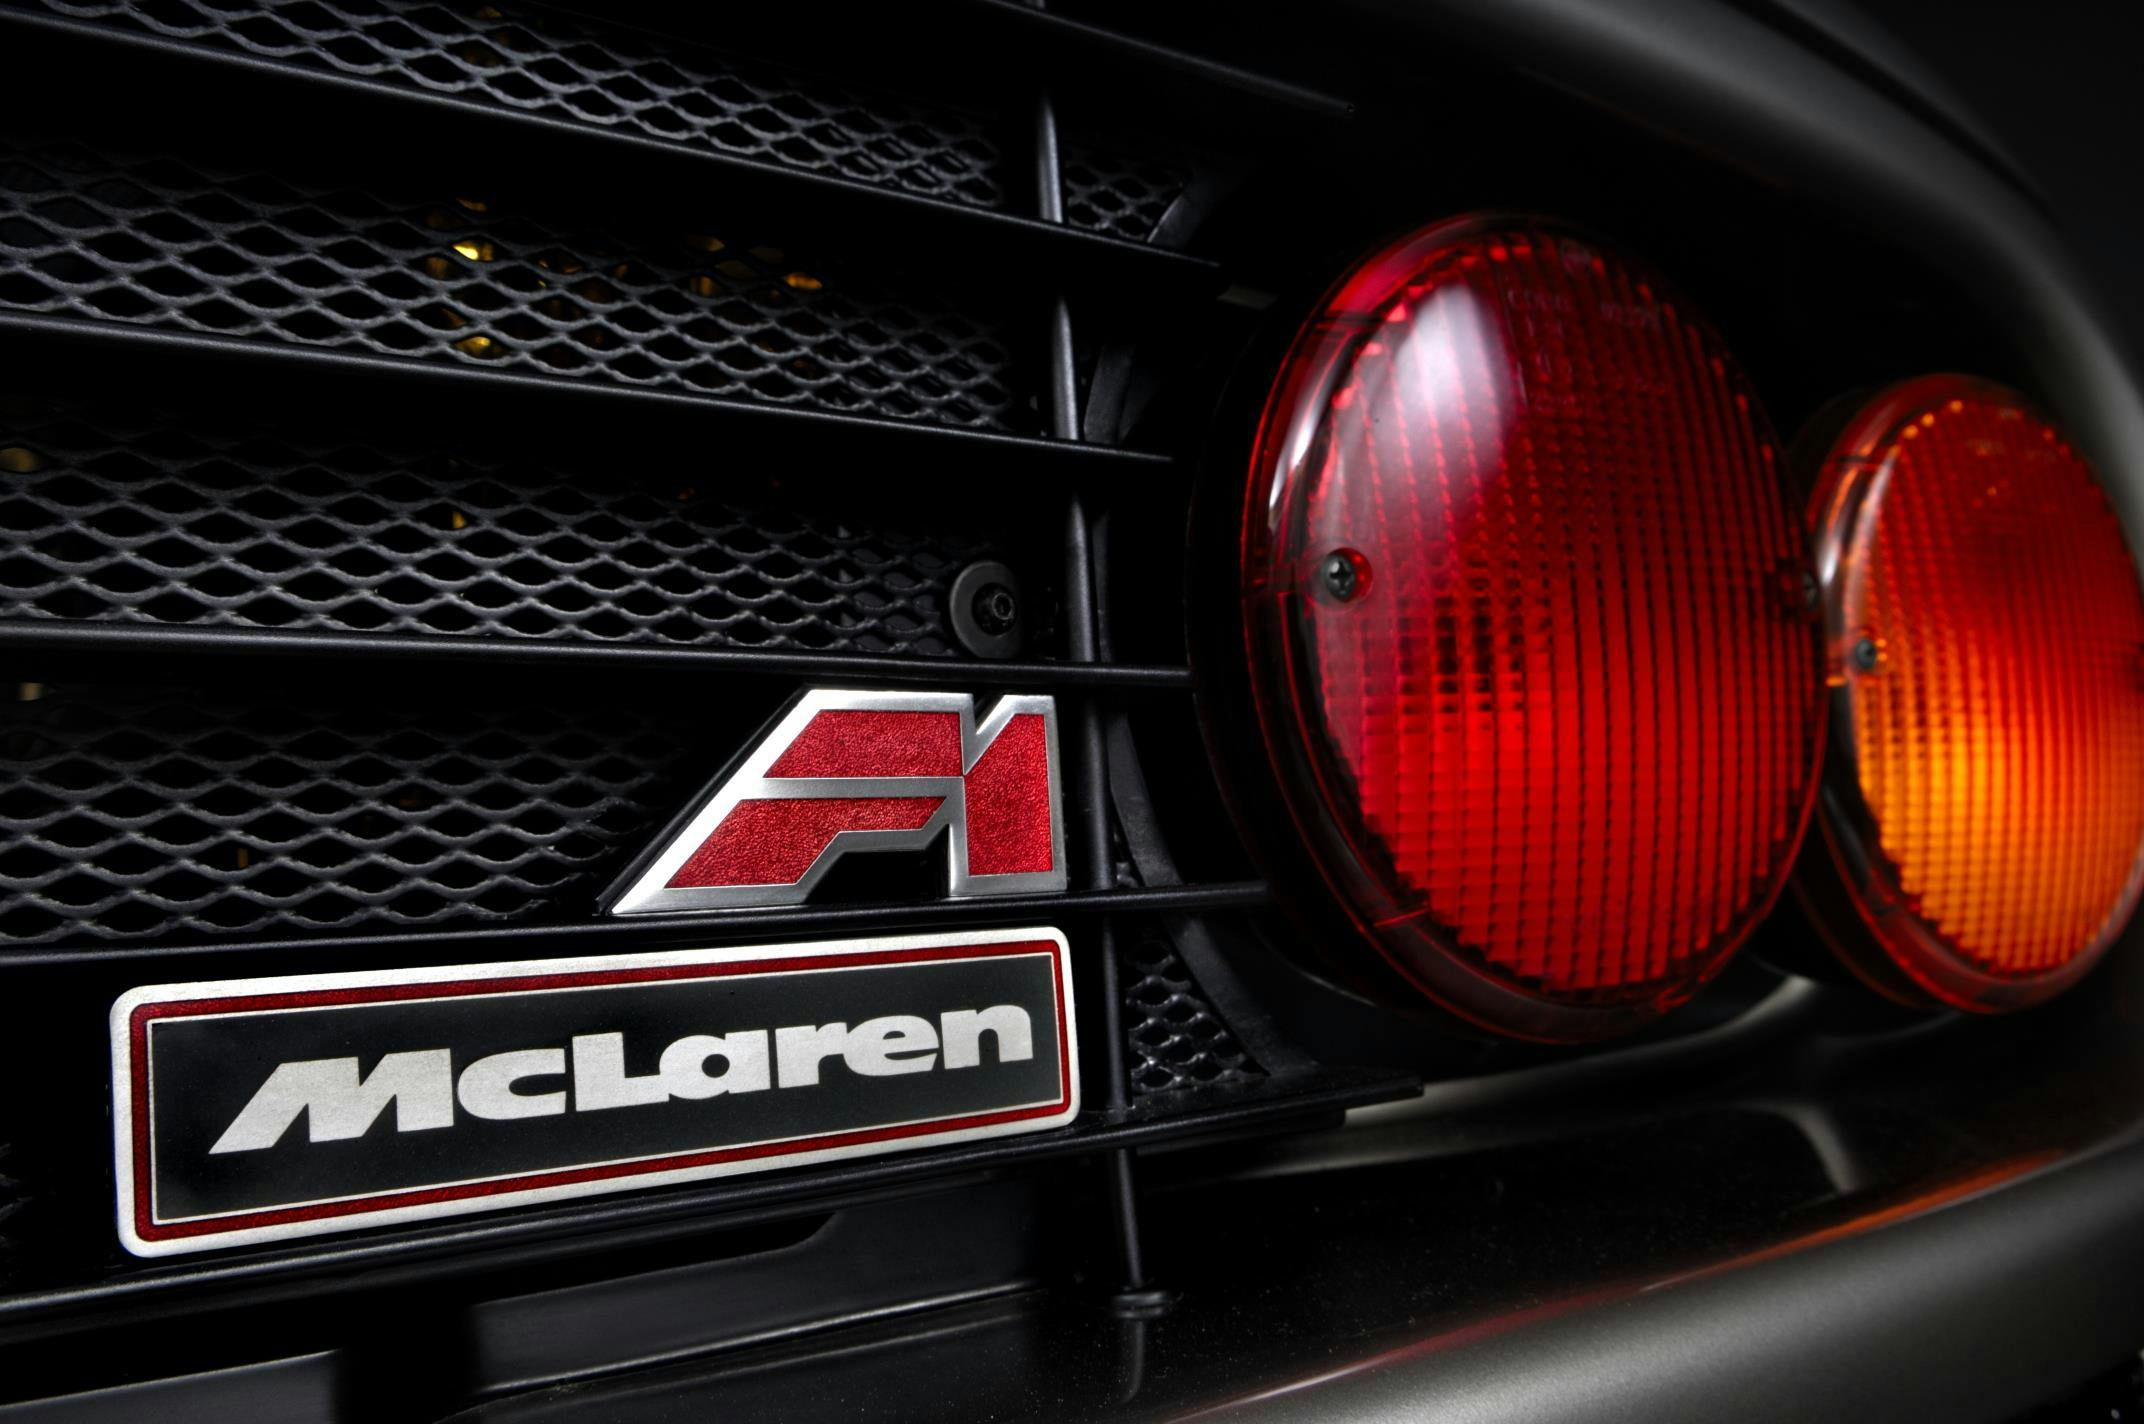 McLaren F1 rear badging and taillights